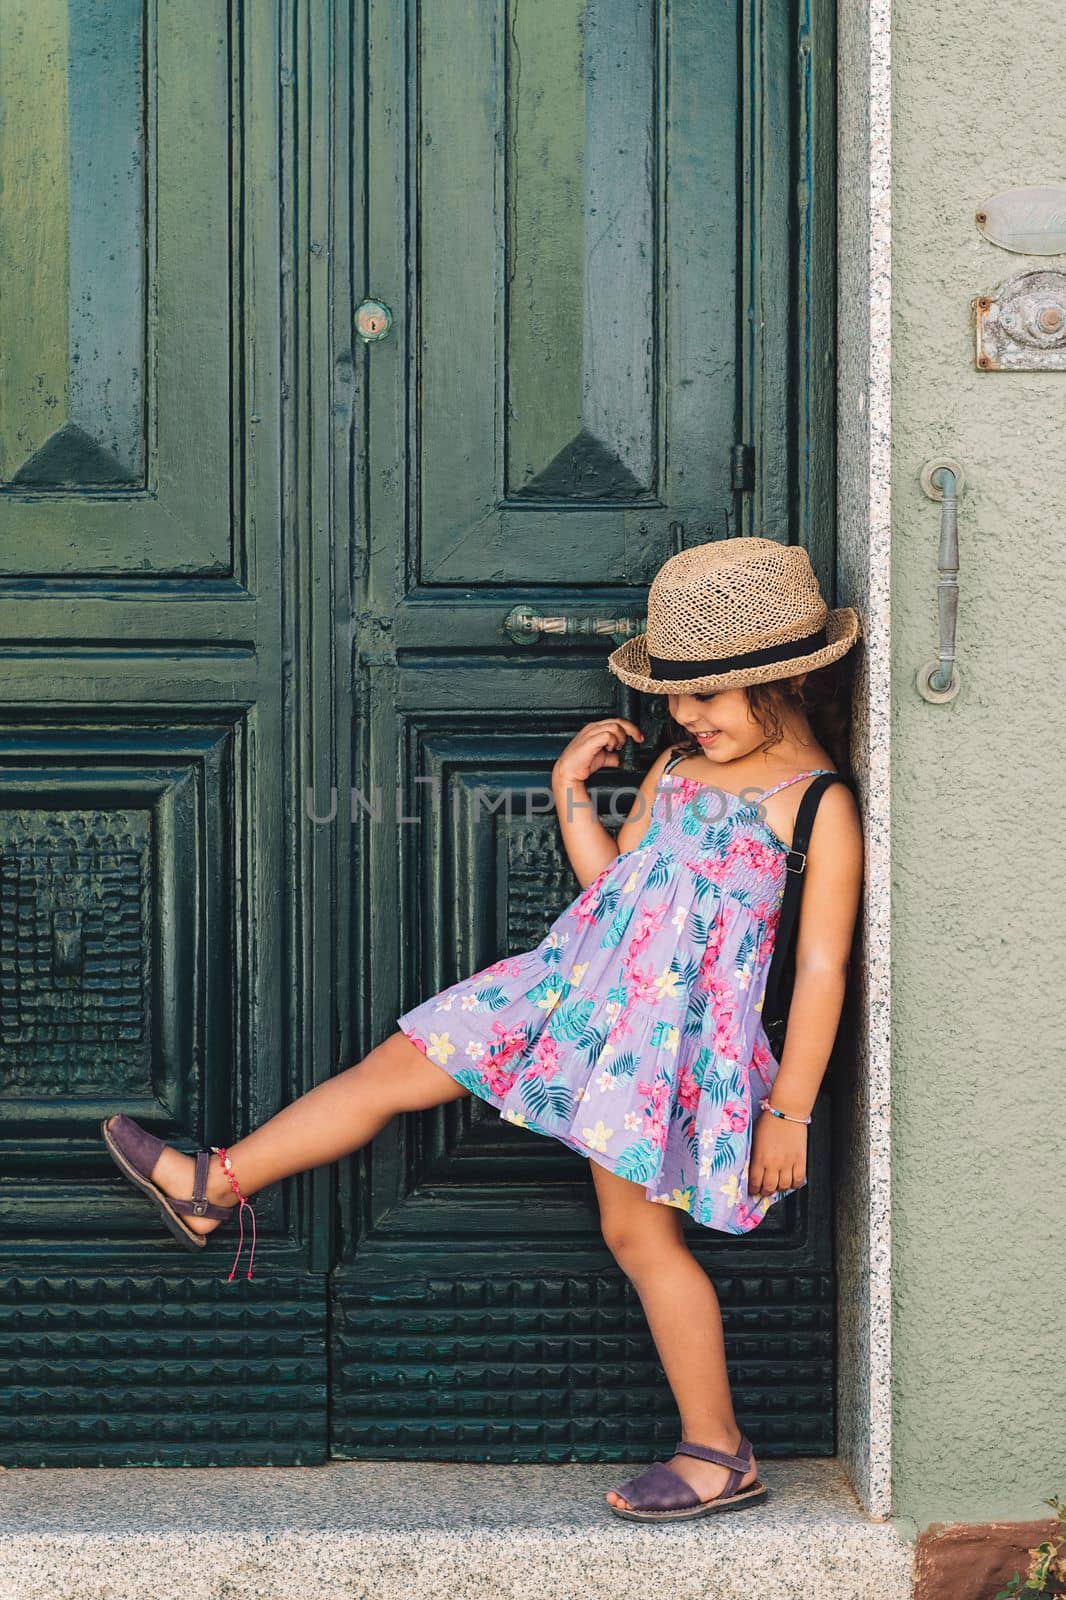 Little girl poses funny in front of the green door by raulmelldo